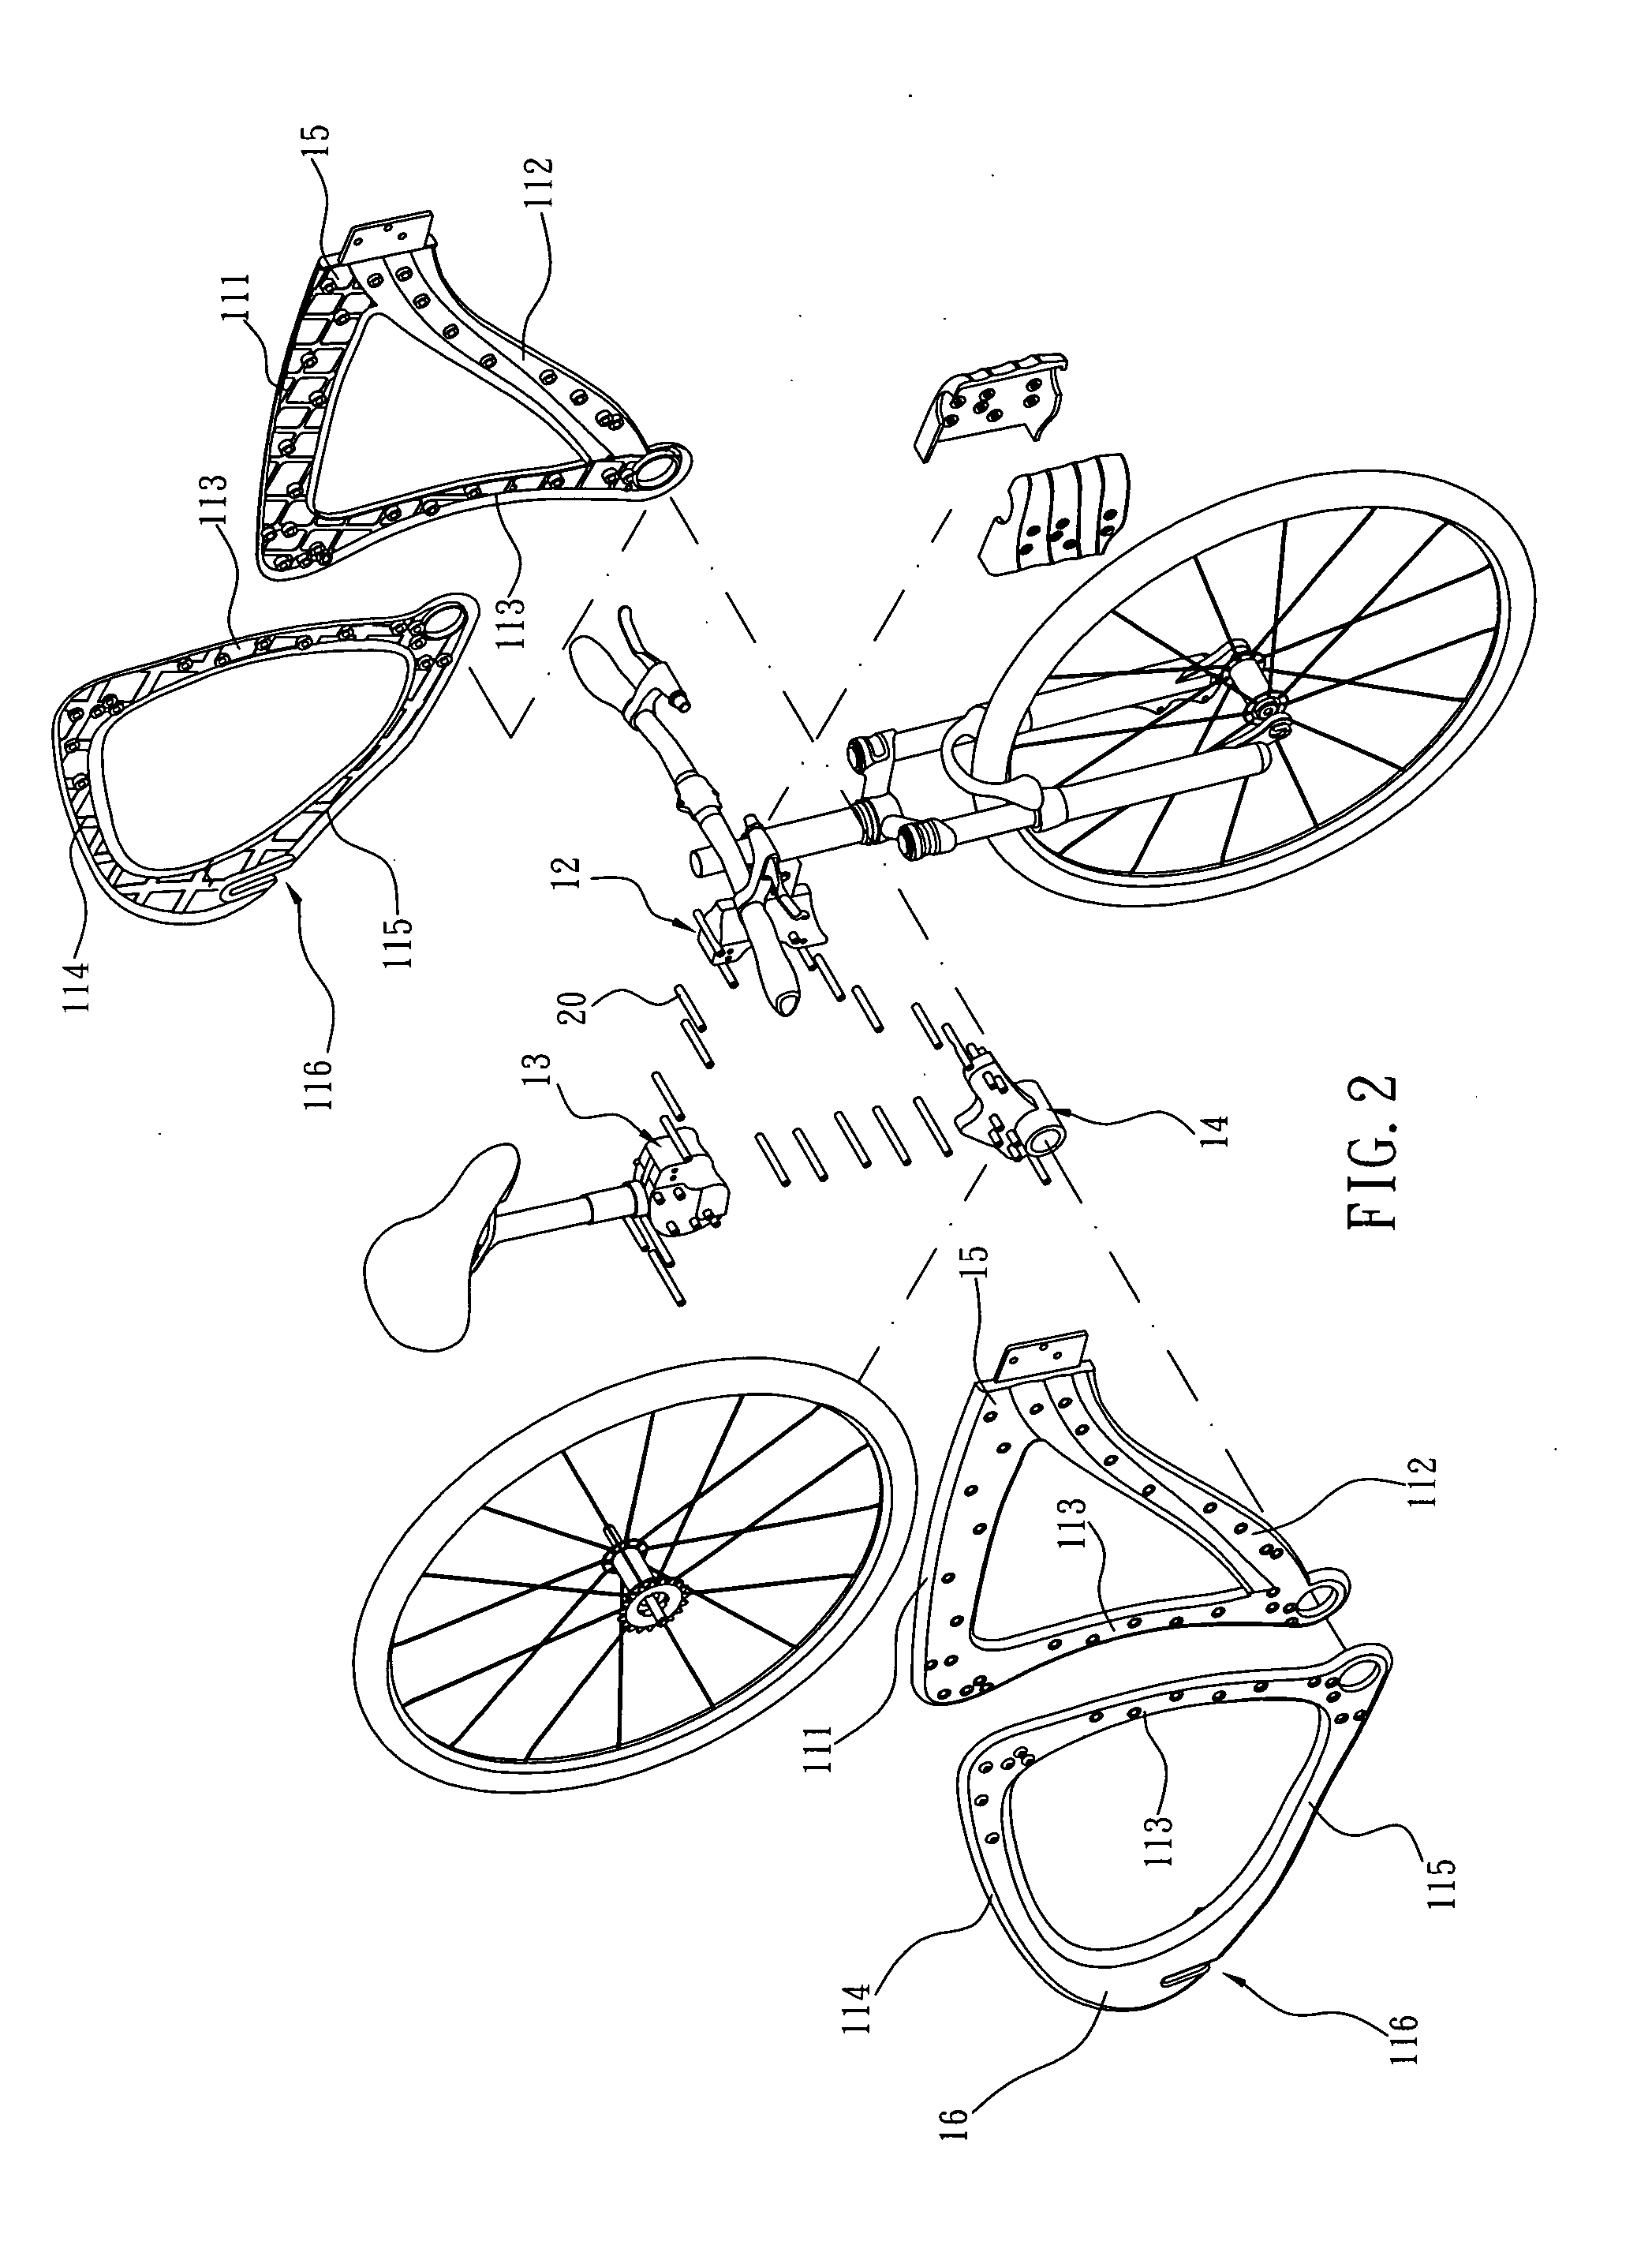 Modulized bicycle frame